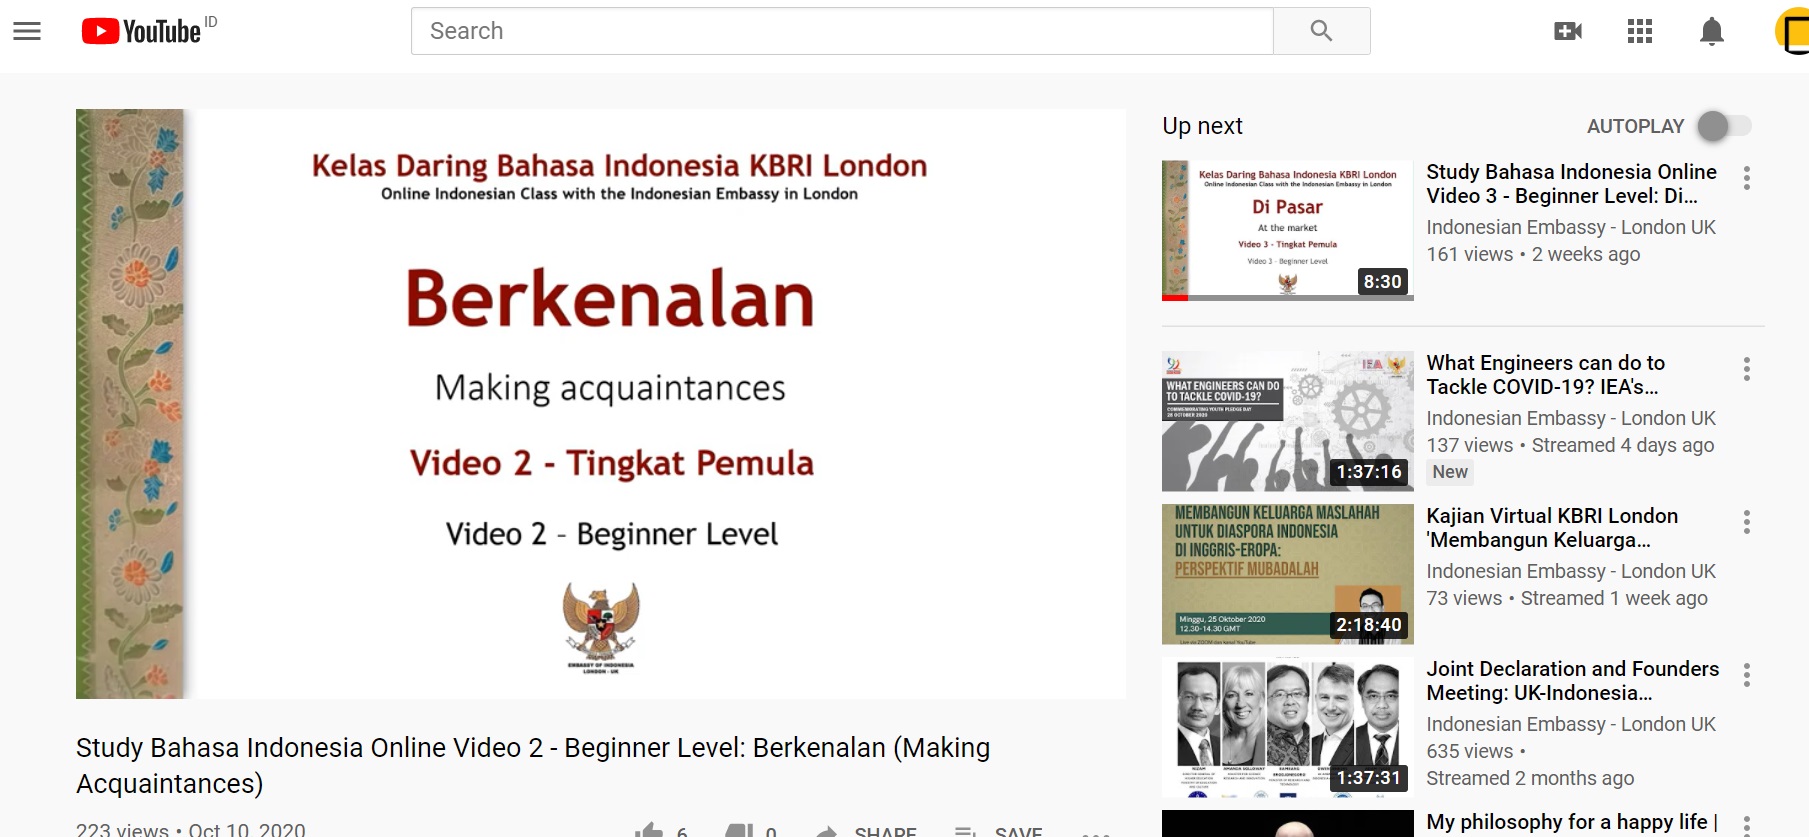 Considering the high interest of foreigners to learn Bahasa Indonesia, the Indonesian Embassy in London has opened an online class via a YouTube account.